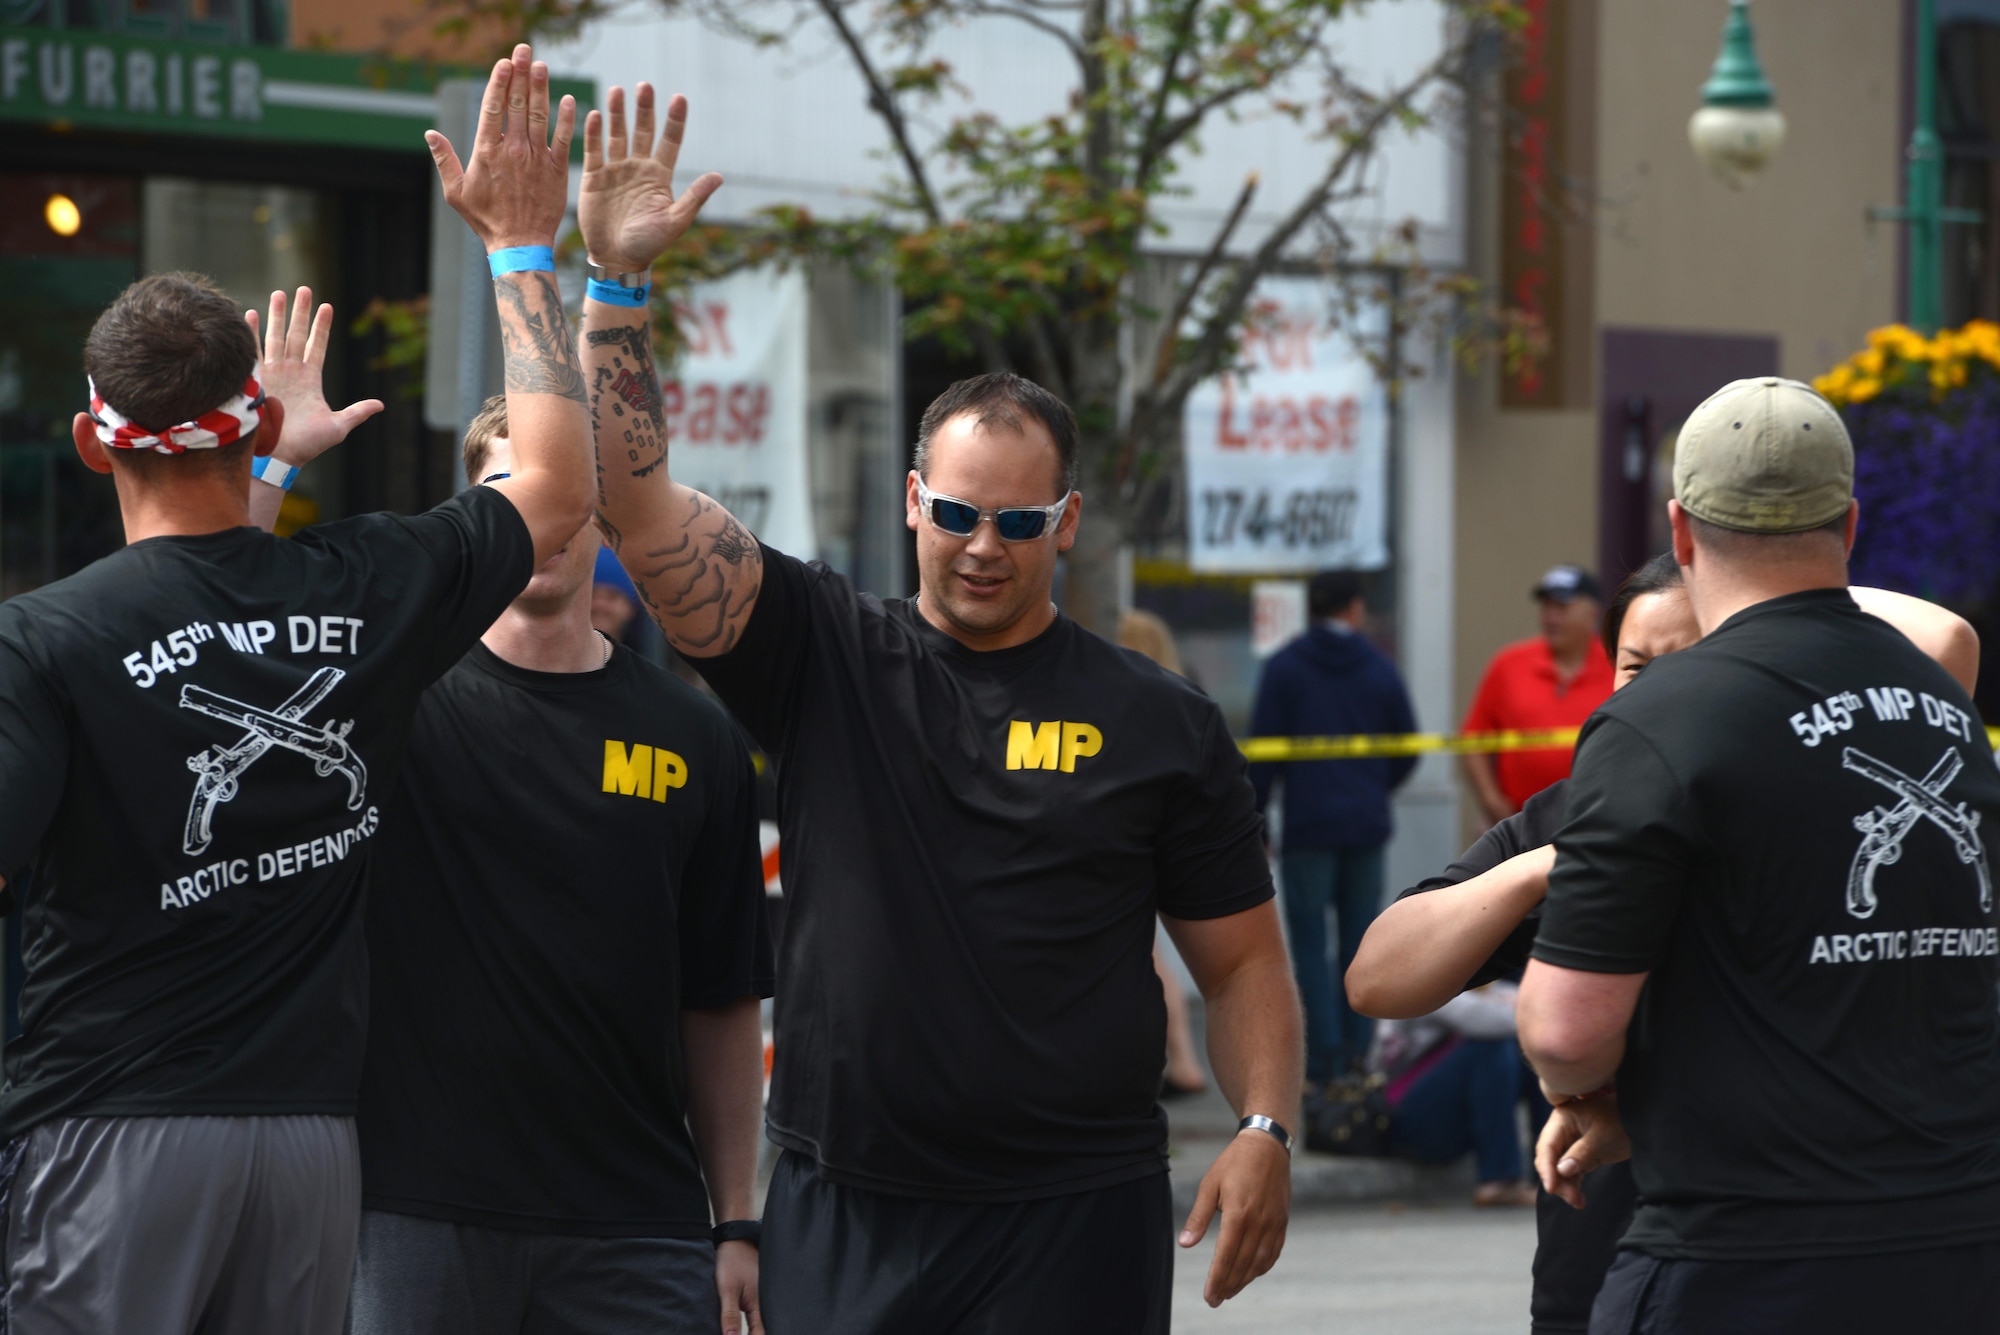 The ‘Arctic Defenders,’ of the 545th Military Police Company, takes first place in the Hero Games during the Downtown Summer Solstice Festival in Anchorage, Alaska, June 18, 2016. The Hero Games is a friendly competition between Alaska’s first responders with challenges that require balance, strength and teamwork. (U.S. Air Force photo Airman 1st Class Christopher R. Morales)